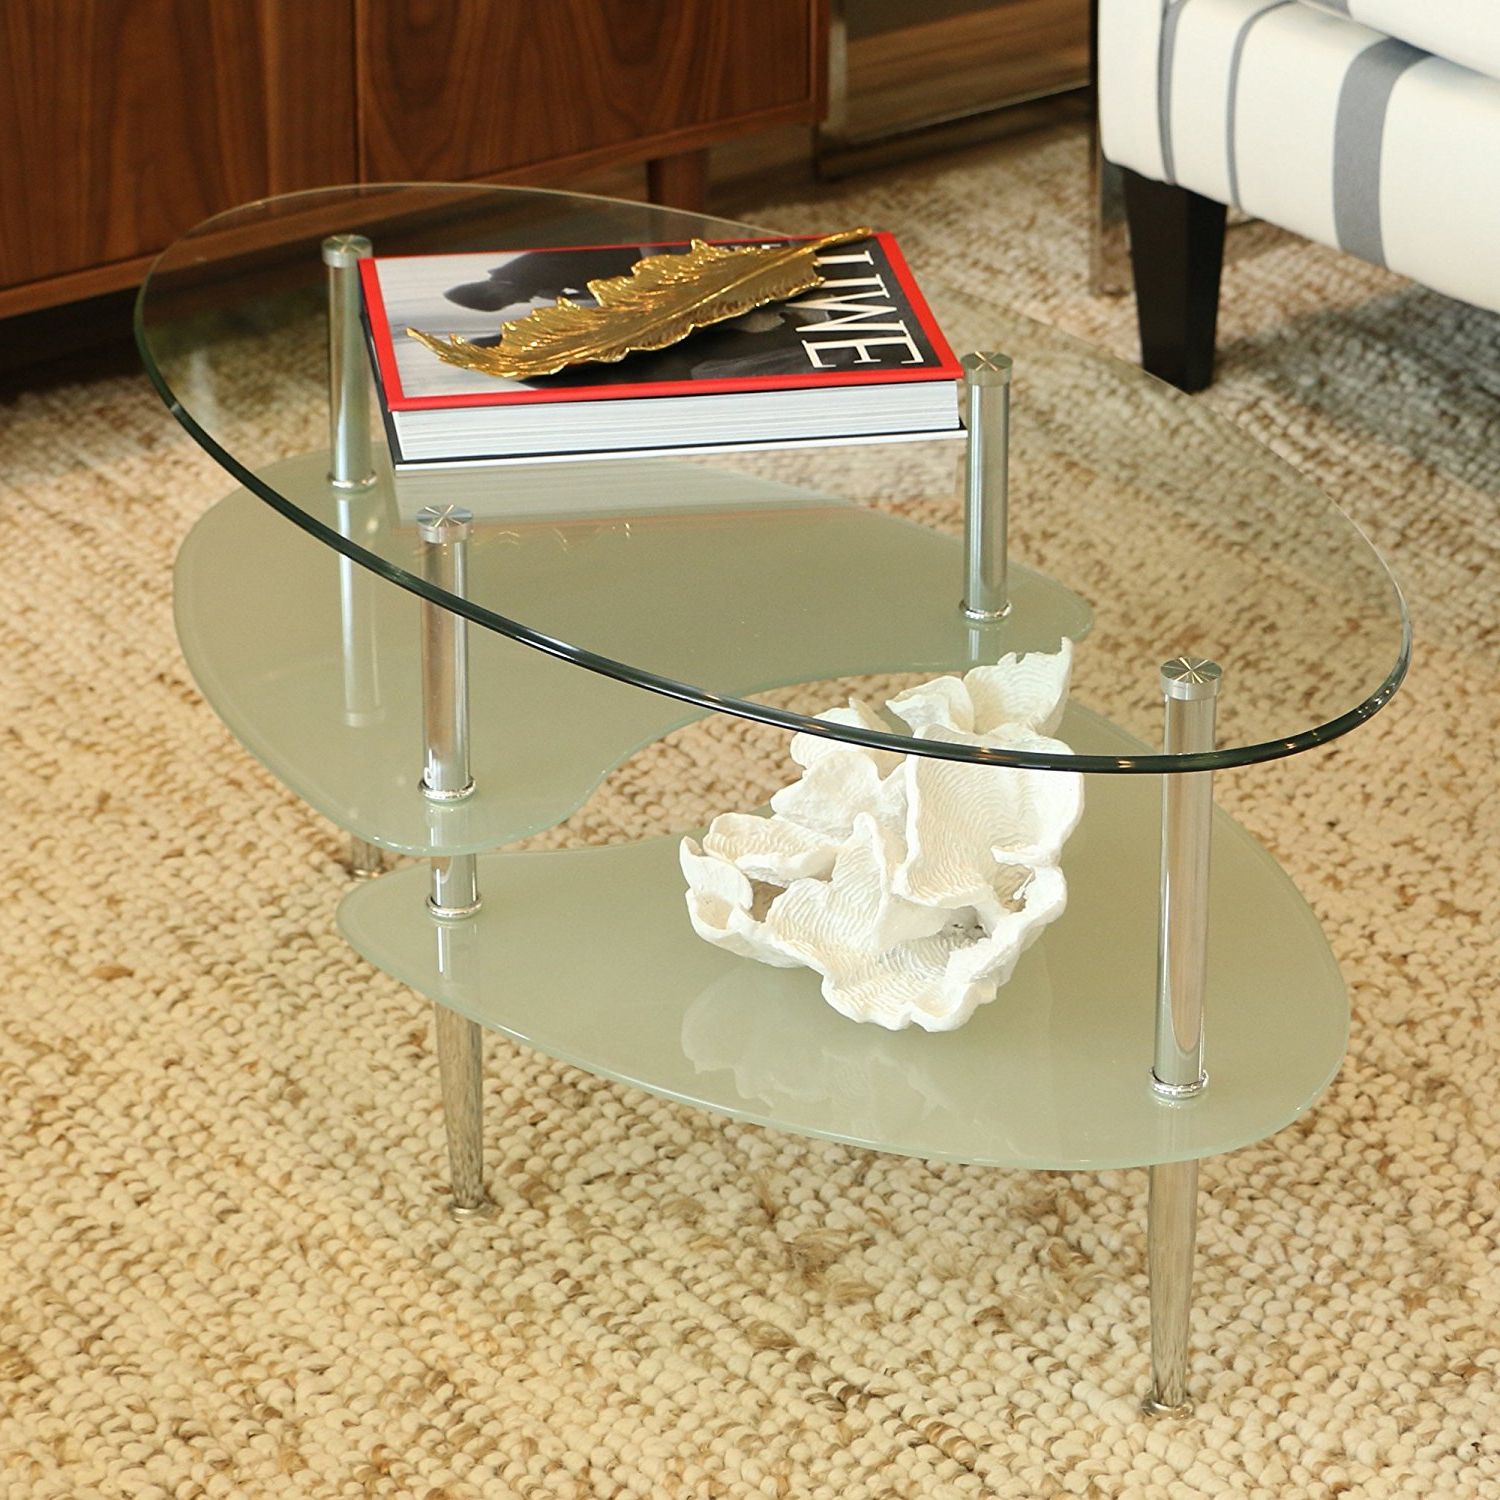 Most Current 3 Tier Coffee Tables Throughout 14 3 Tier Glass Coffee Table Pics (Gallery 1 of 20)